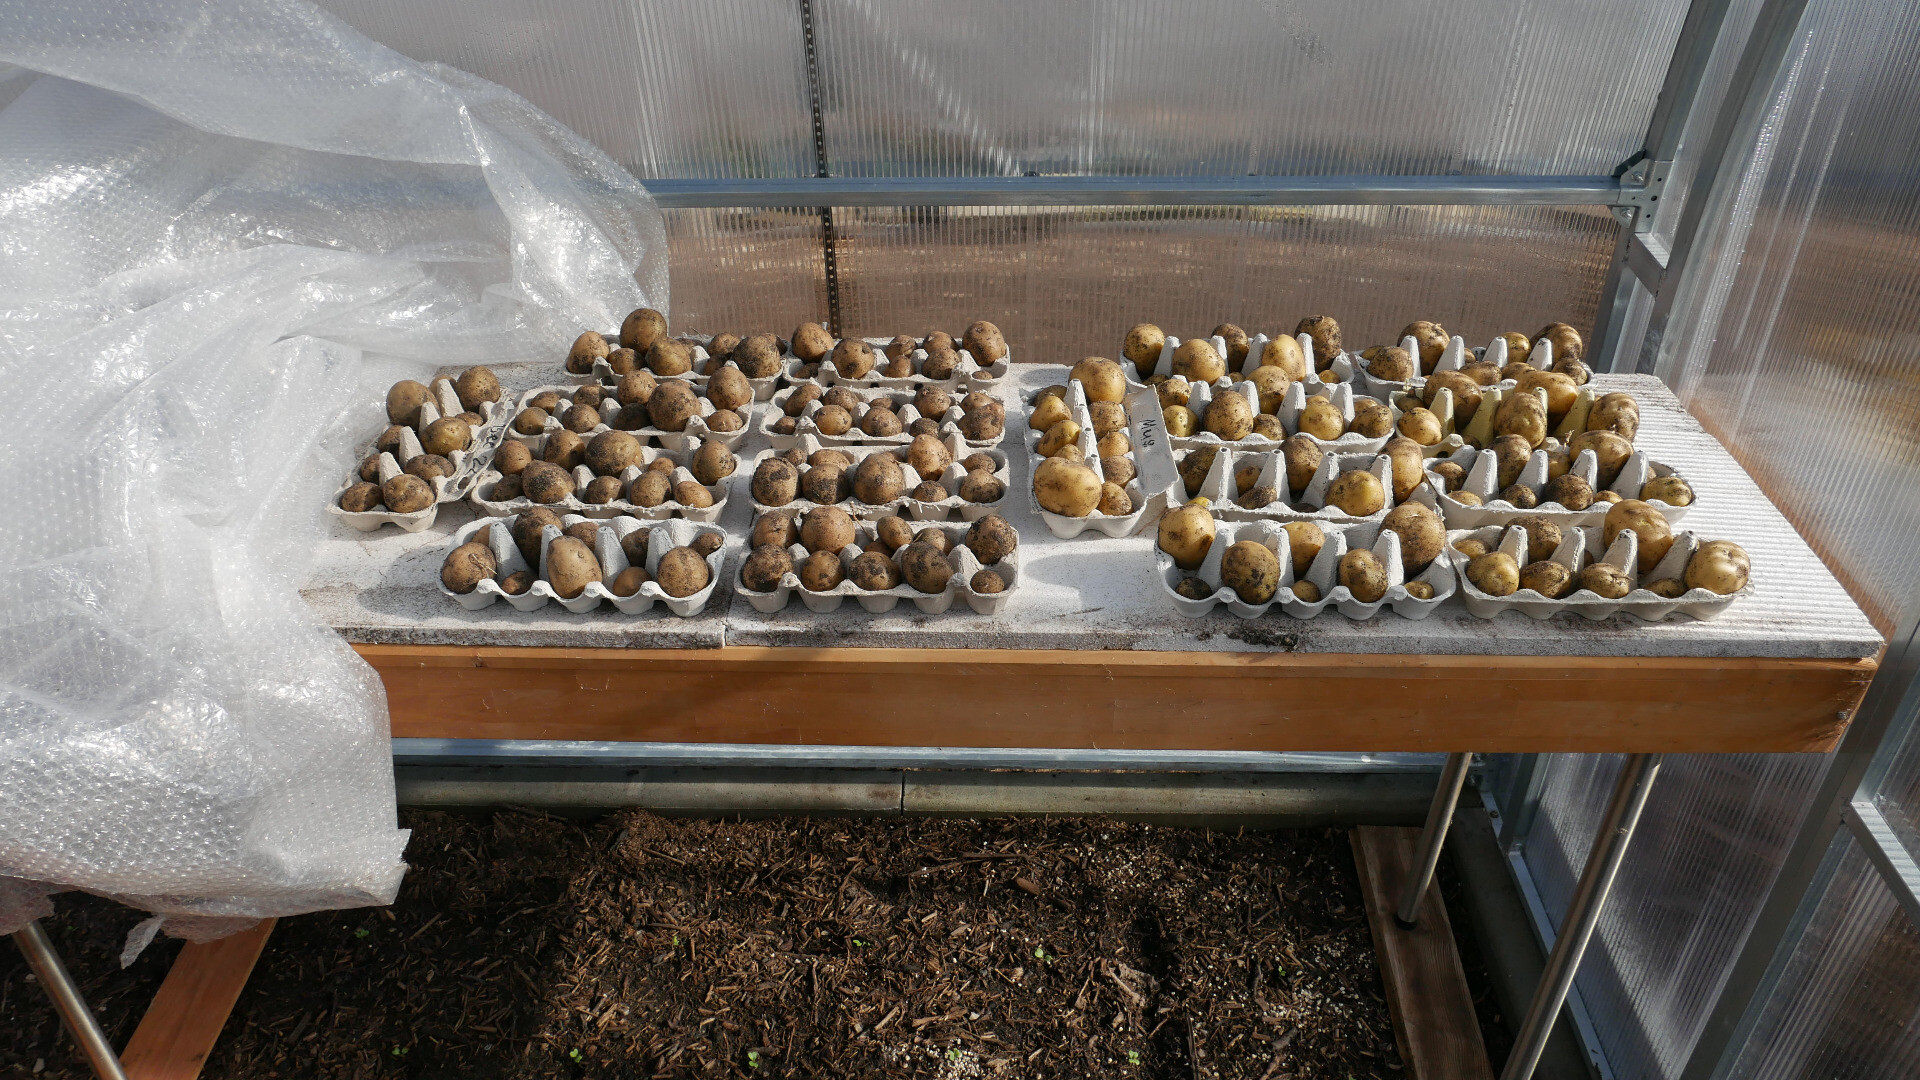 chitting potatoes on a wooden bench